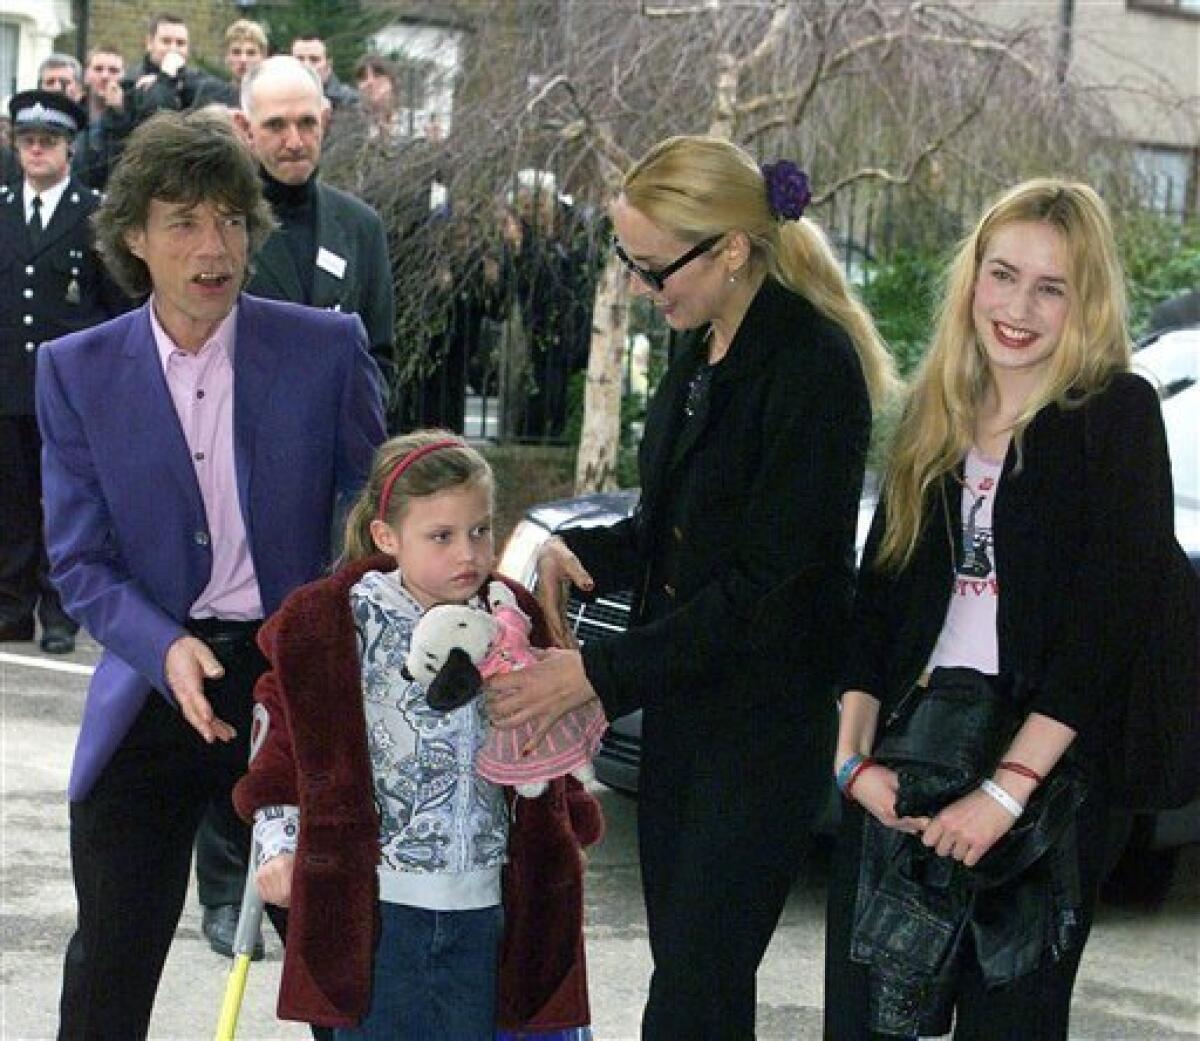 FILE - This March 20, 2000 file photo shows British pop star Mick Jagger arriving at his old school in Dartford, east of London, to open a new music center with his former wife Jerry, second from right, and children, Elizabeth, right, and Georgia, at front. Jagger is the new spokesmodel for Material Girl, the collection designed by Madonna and her daughter Lola. (AP Photo)